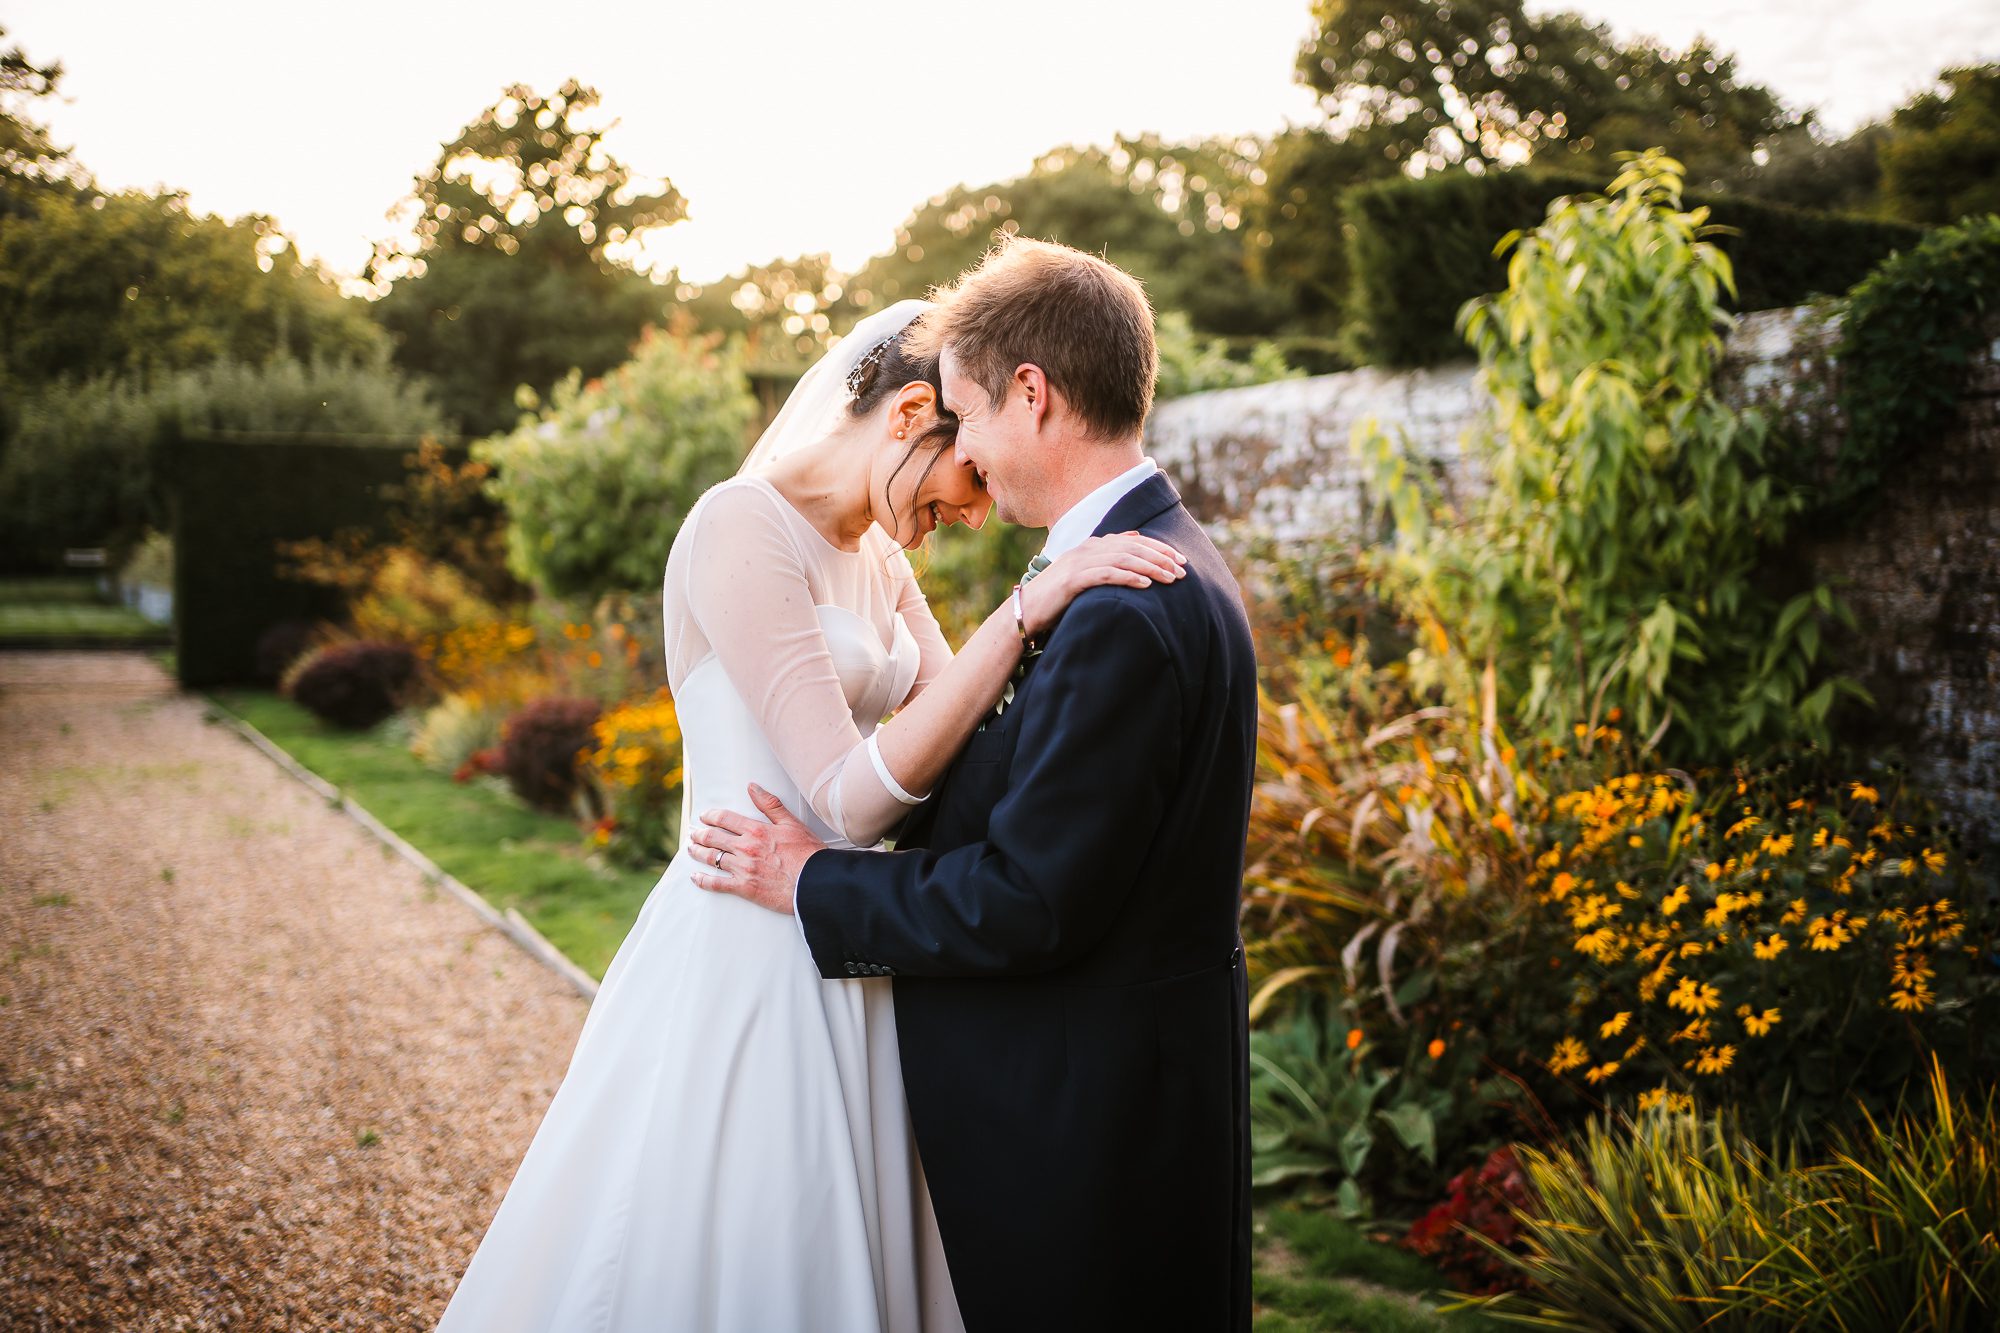 Golden Hour bride and groom photos at an October countryside wedding.